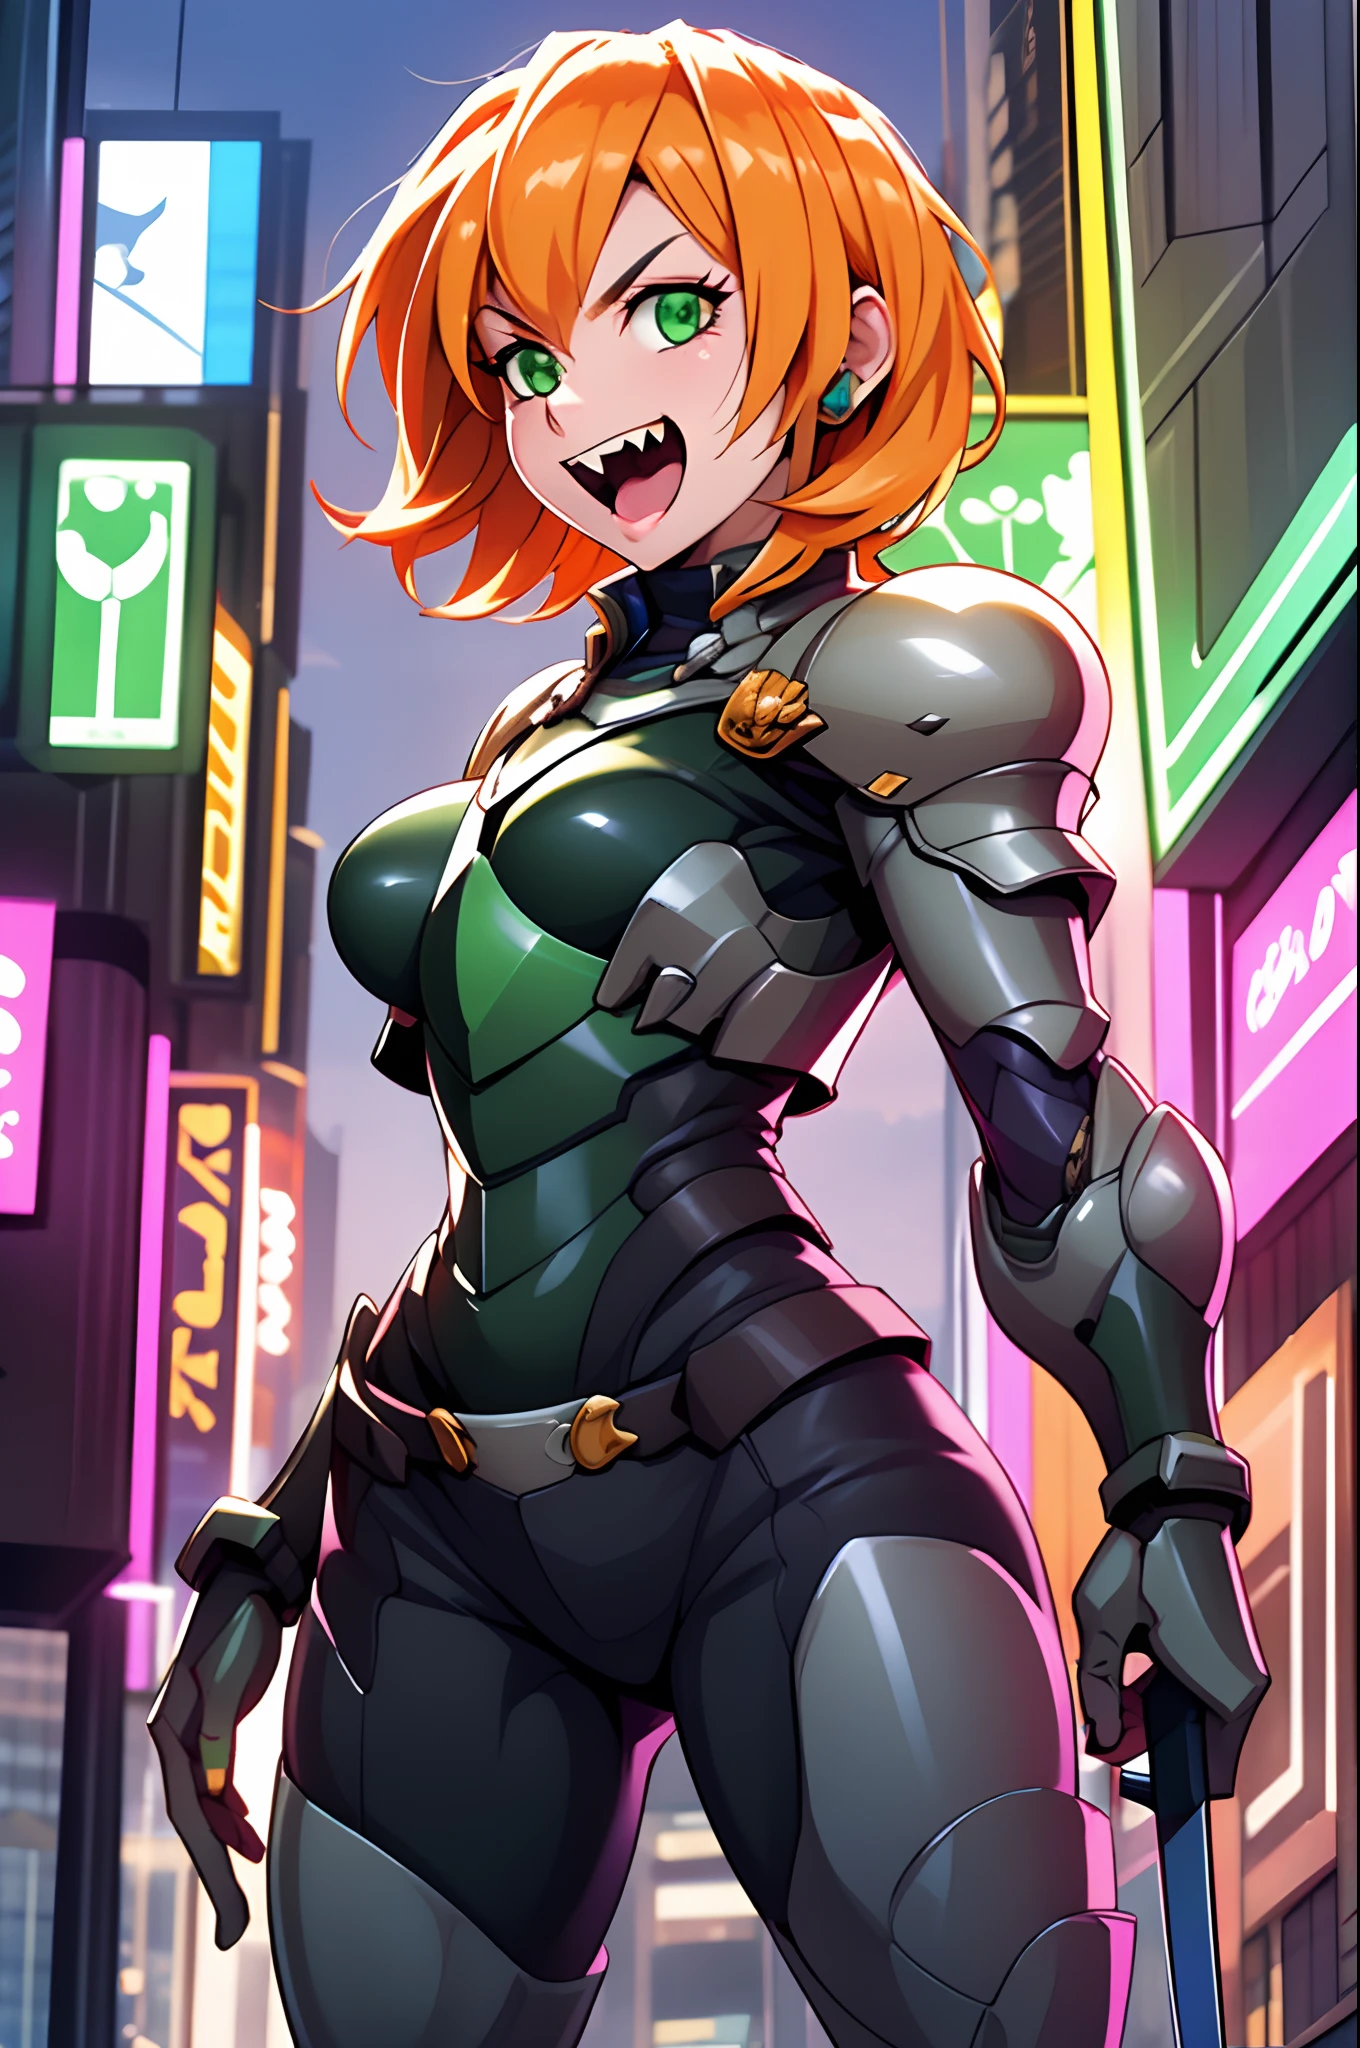 excel, orange hair, smile, fang, open mouth, green eyes,standing, medium breast, pants, pullover, , full body,knight armor, armore, sword holding, fantasy cyberpunk city magic